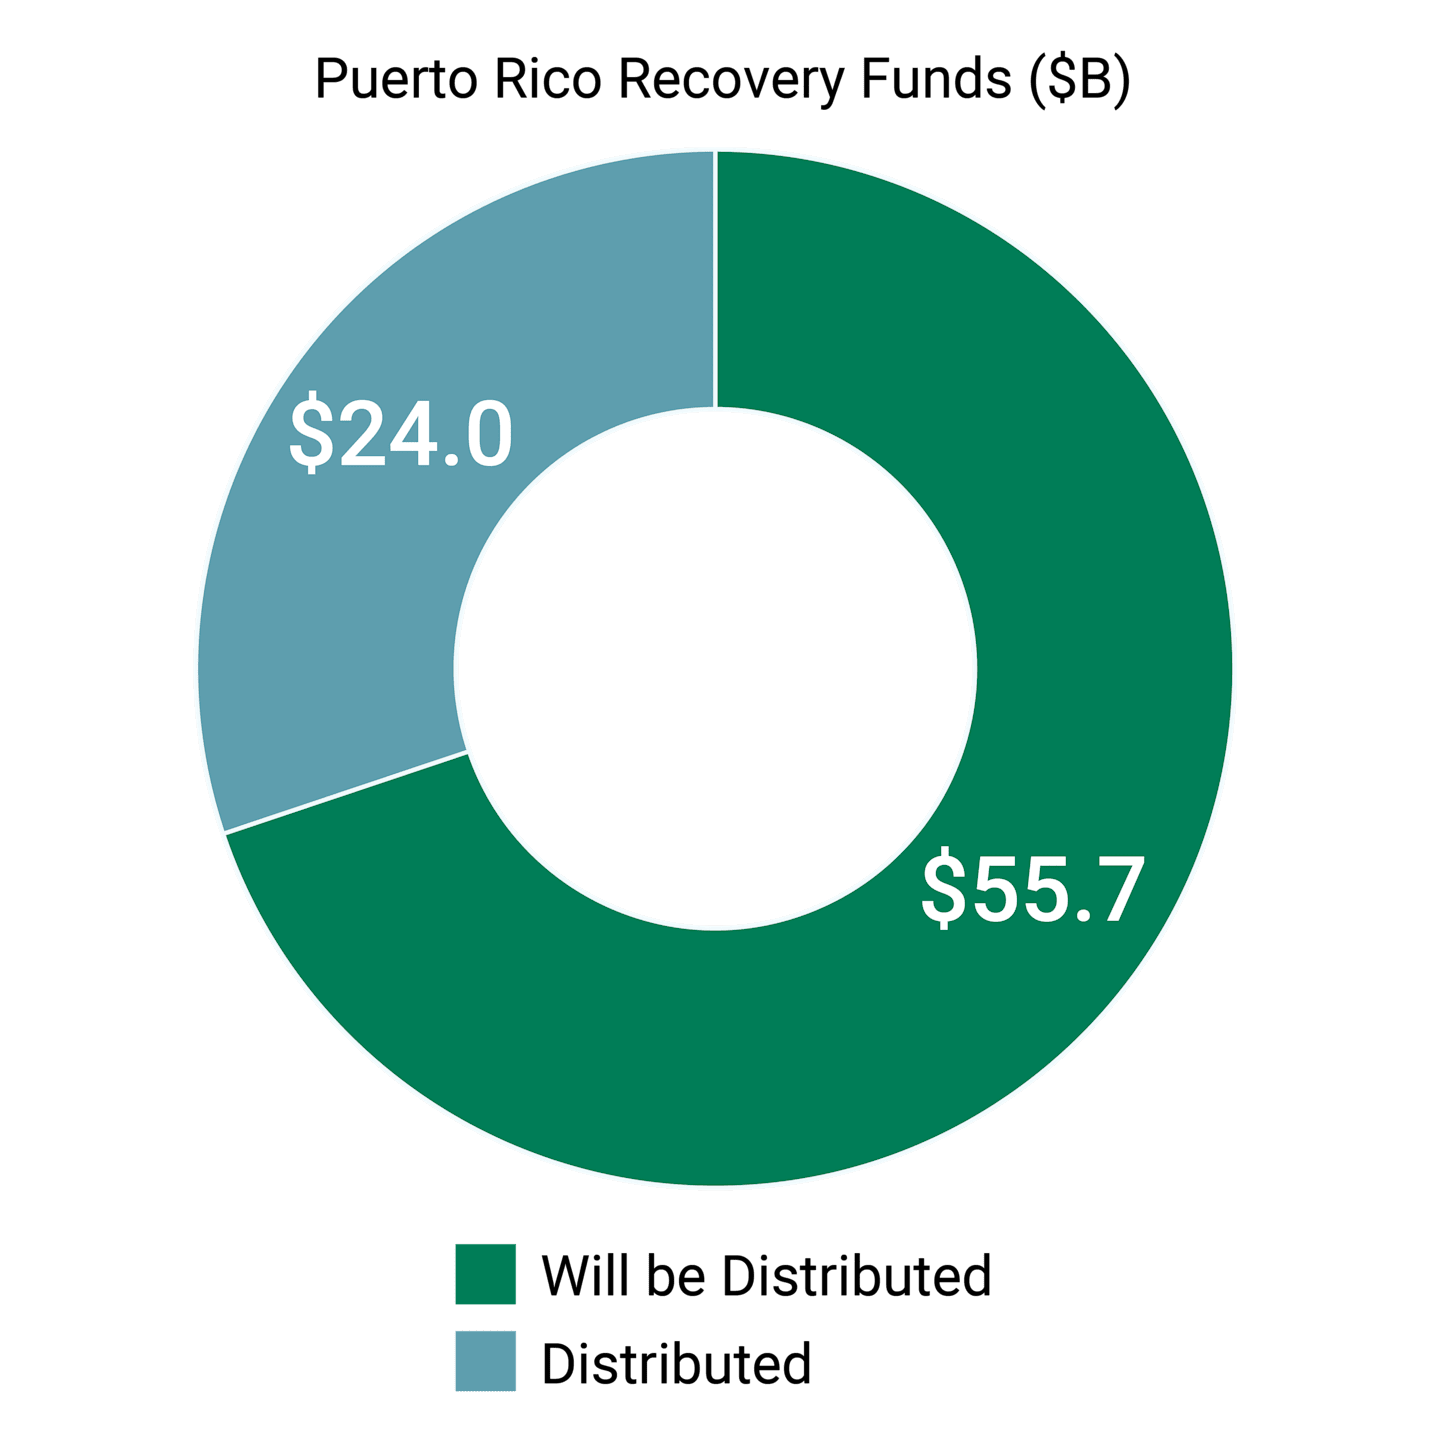 This figure shows that Puerto Rico still has nearly $56 billion of relief funds from 2017’s Hurricane Maria to spend on rebuilding infrastructure.